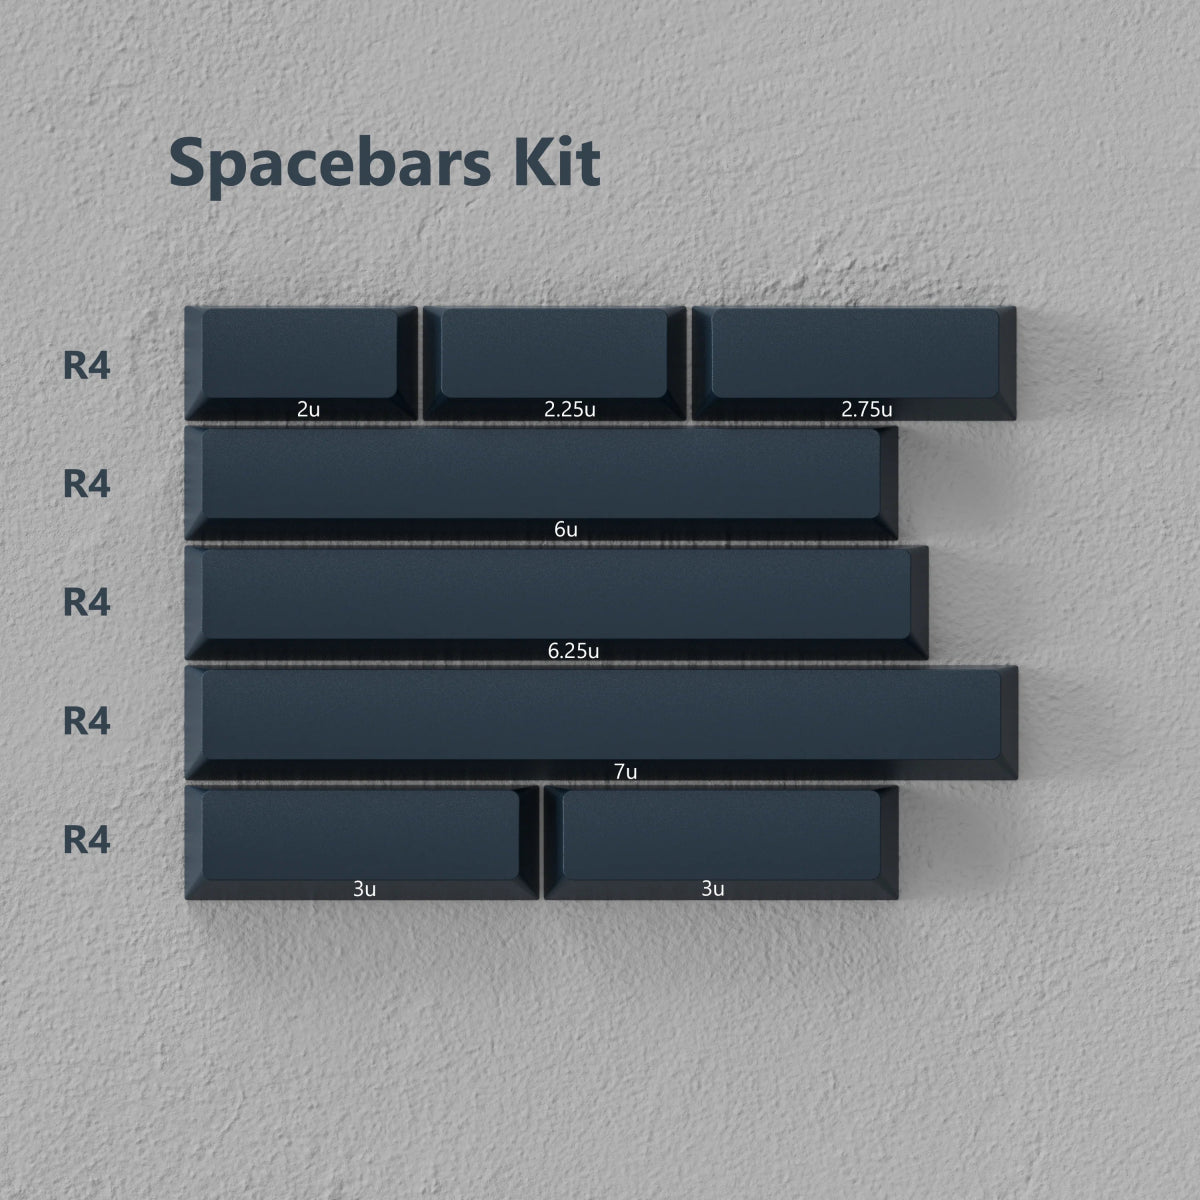 [Pre-order] PBTfans Spark R2 - Keebz N CablesKeycaps